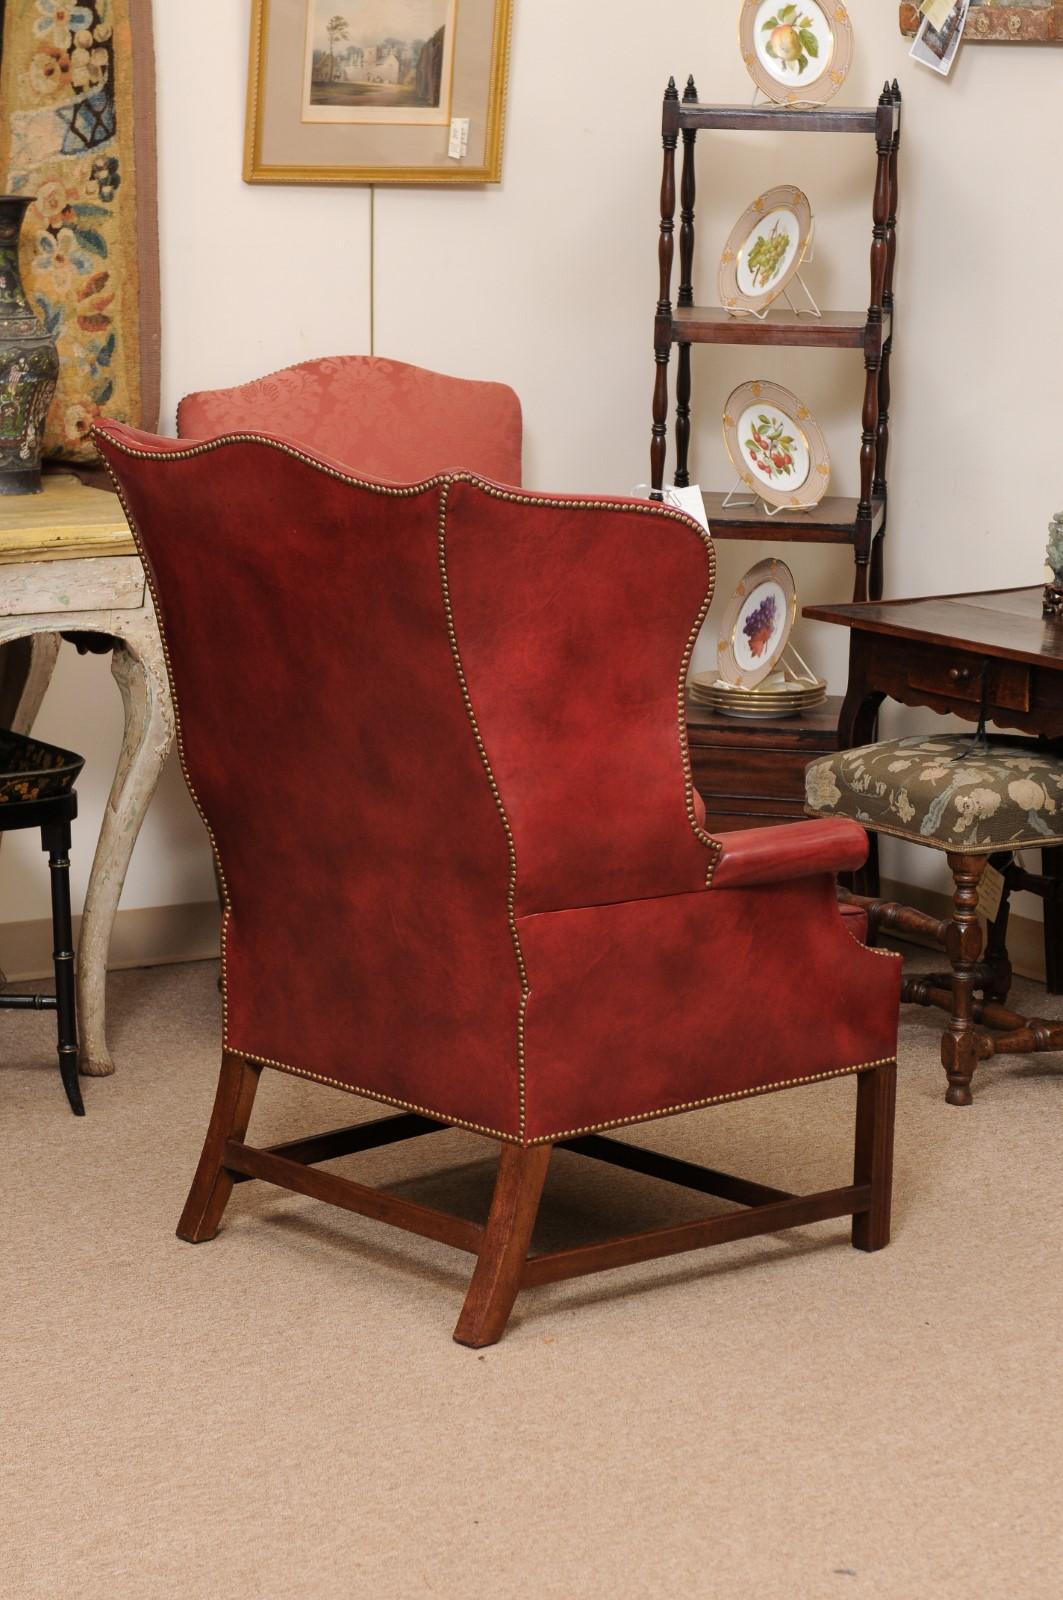 20th Century English Wing Chair in Mahogany & Red Leather Upholstery with Brass  For Sale 7